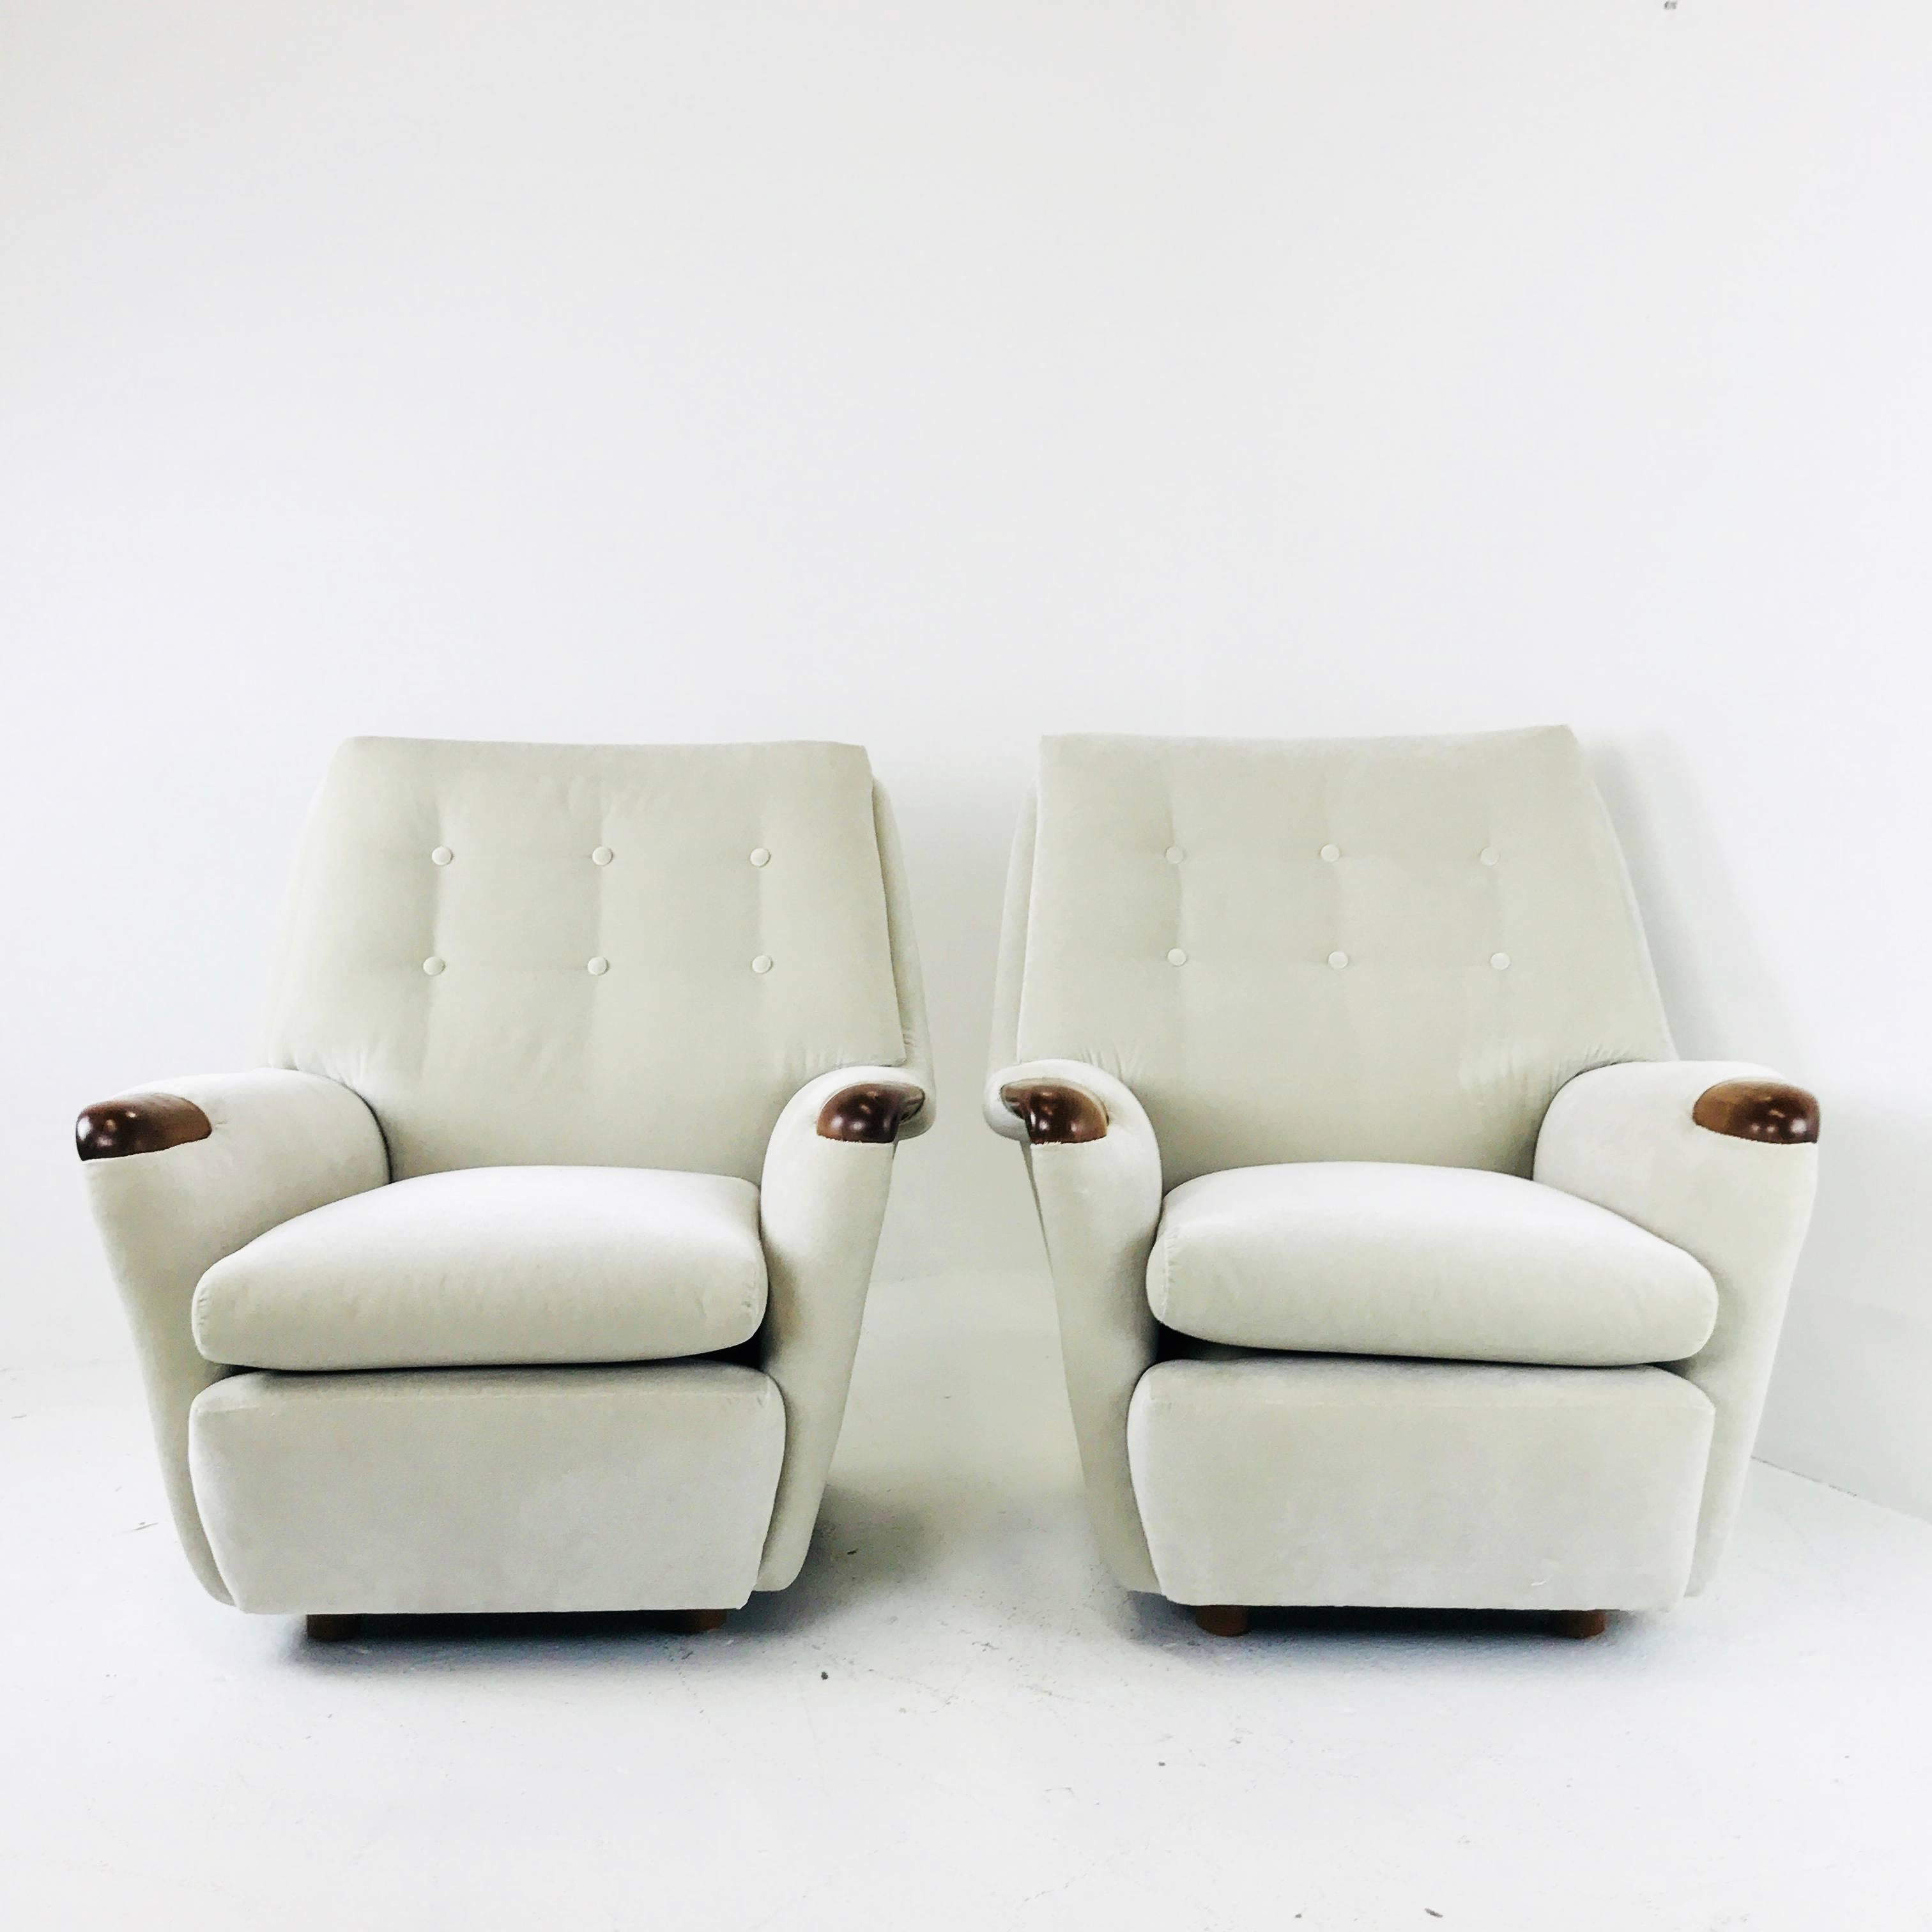 20th Century Pair of Vintage Italian Lounge Chairs in Holly Hunt Velvet